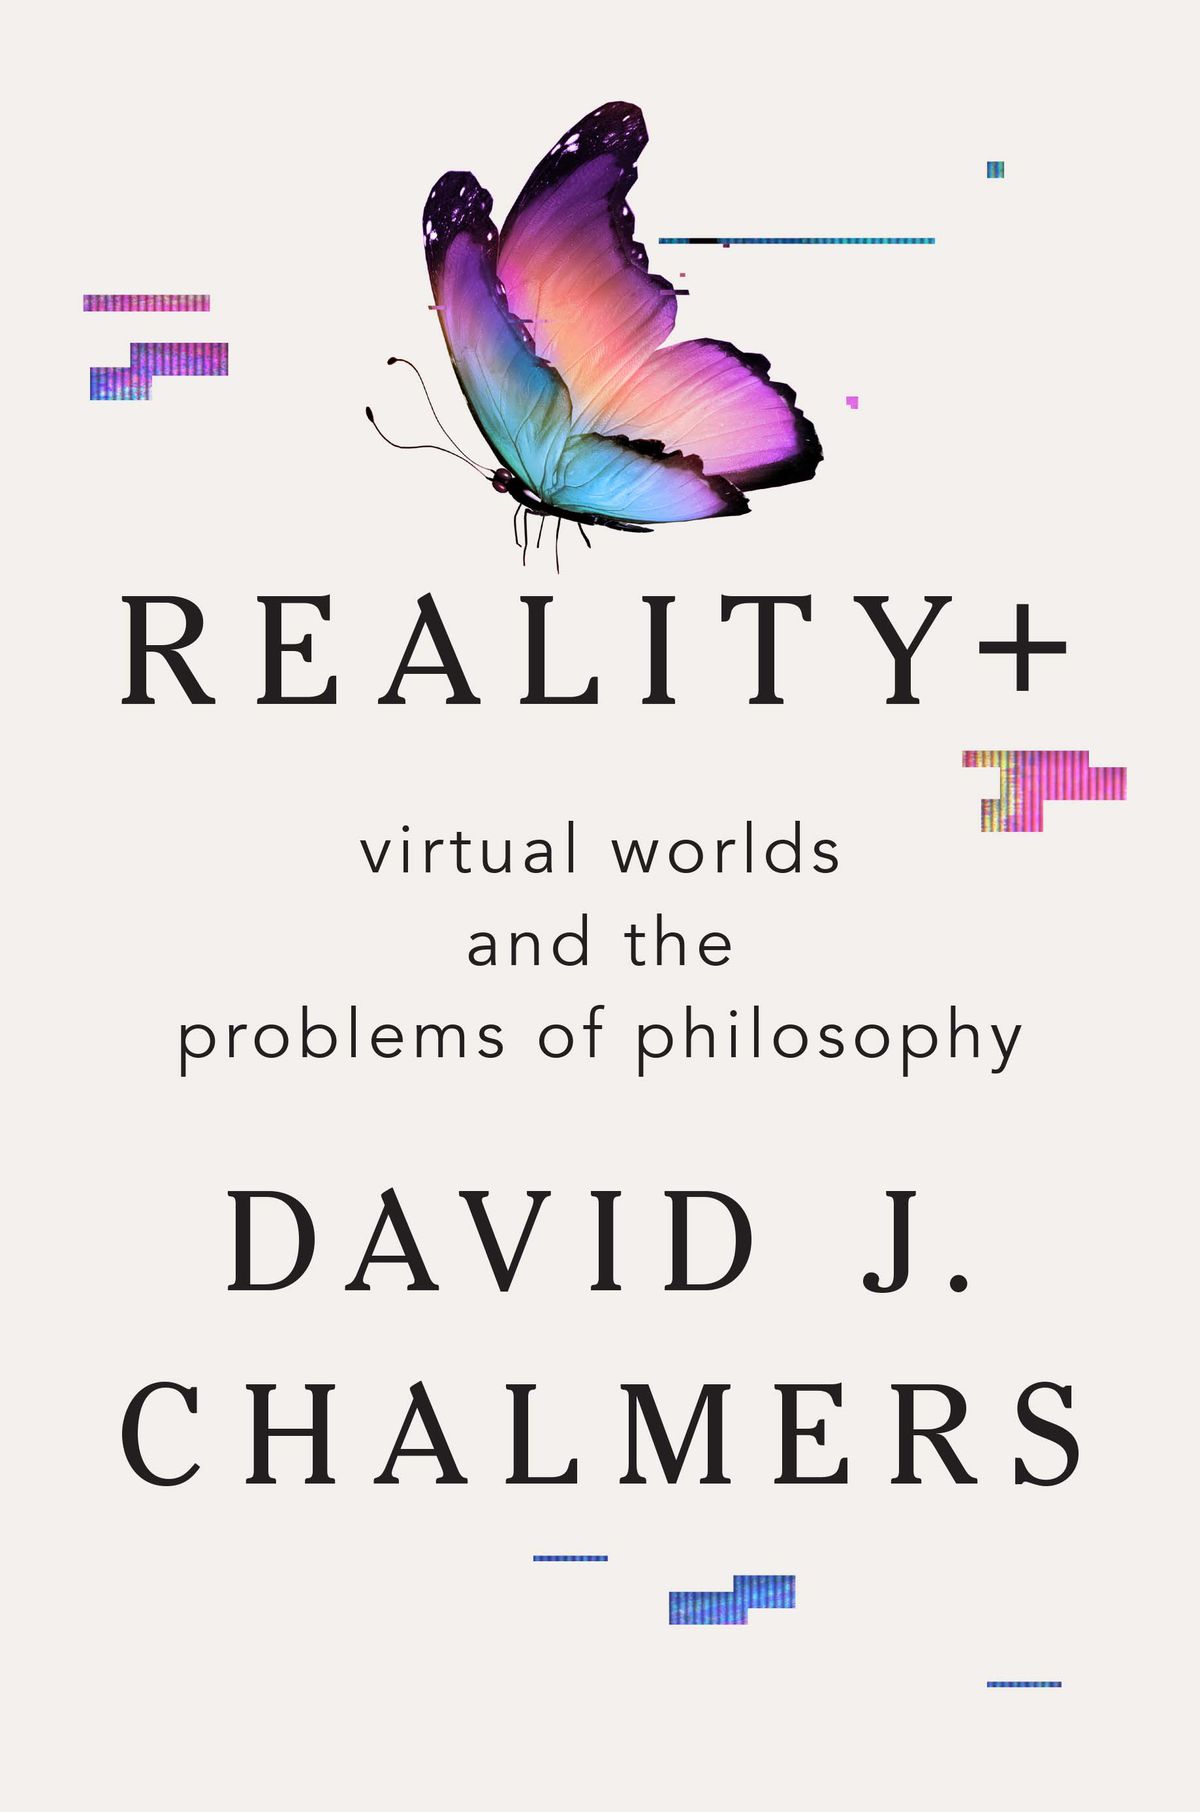 Reality+: David Chalmers explains why virtual reality is reality, too